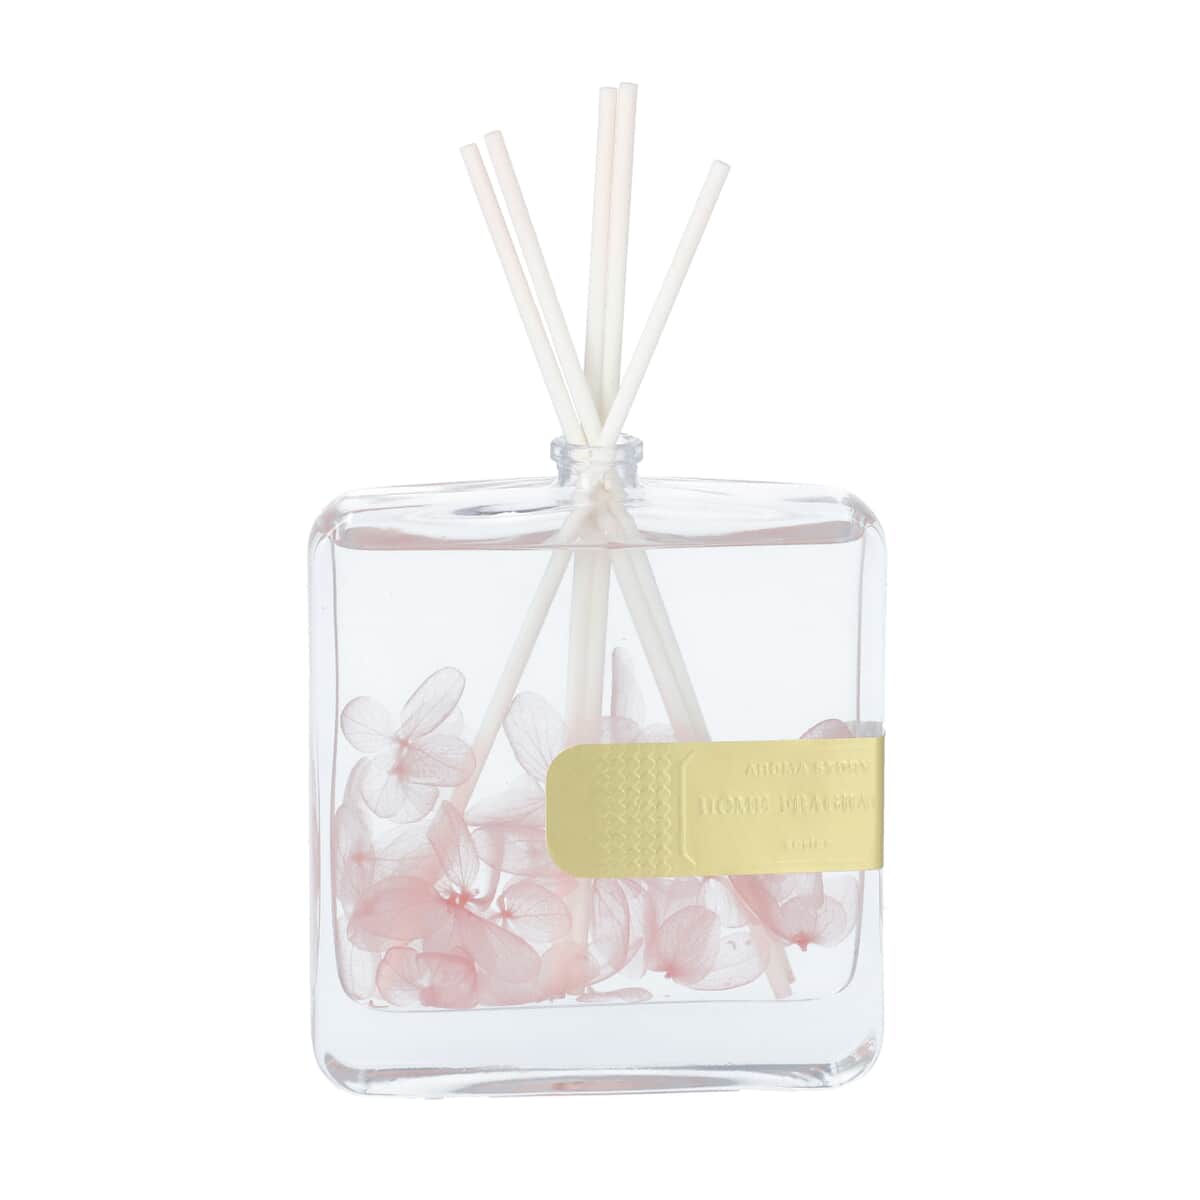 Homesmart Home Air Freshener Diffuser with Real Flowers-Pink (100 ml) image number 3